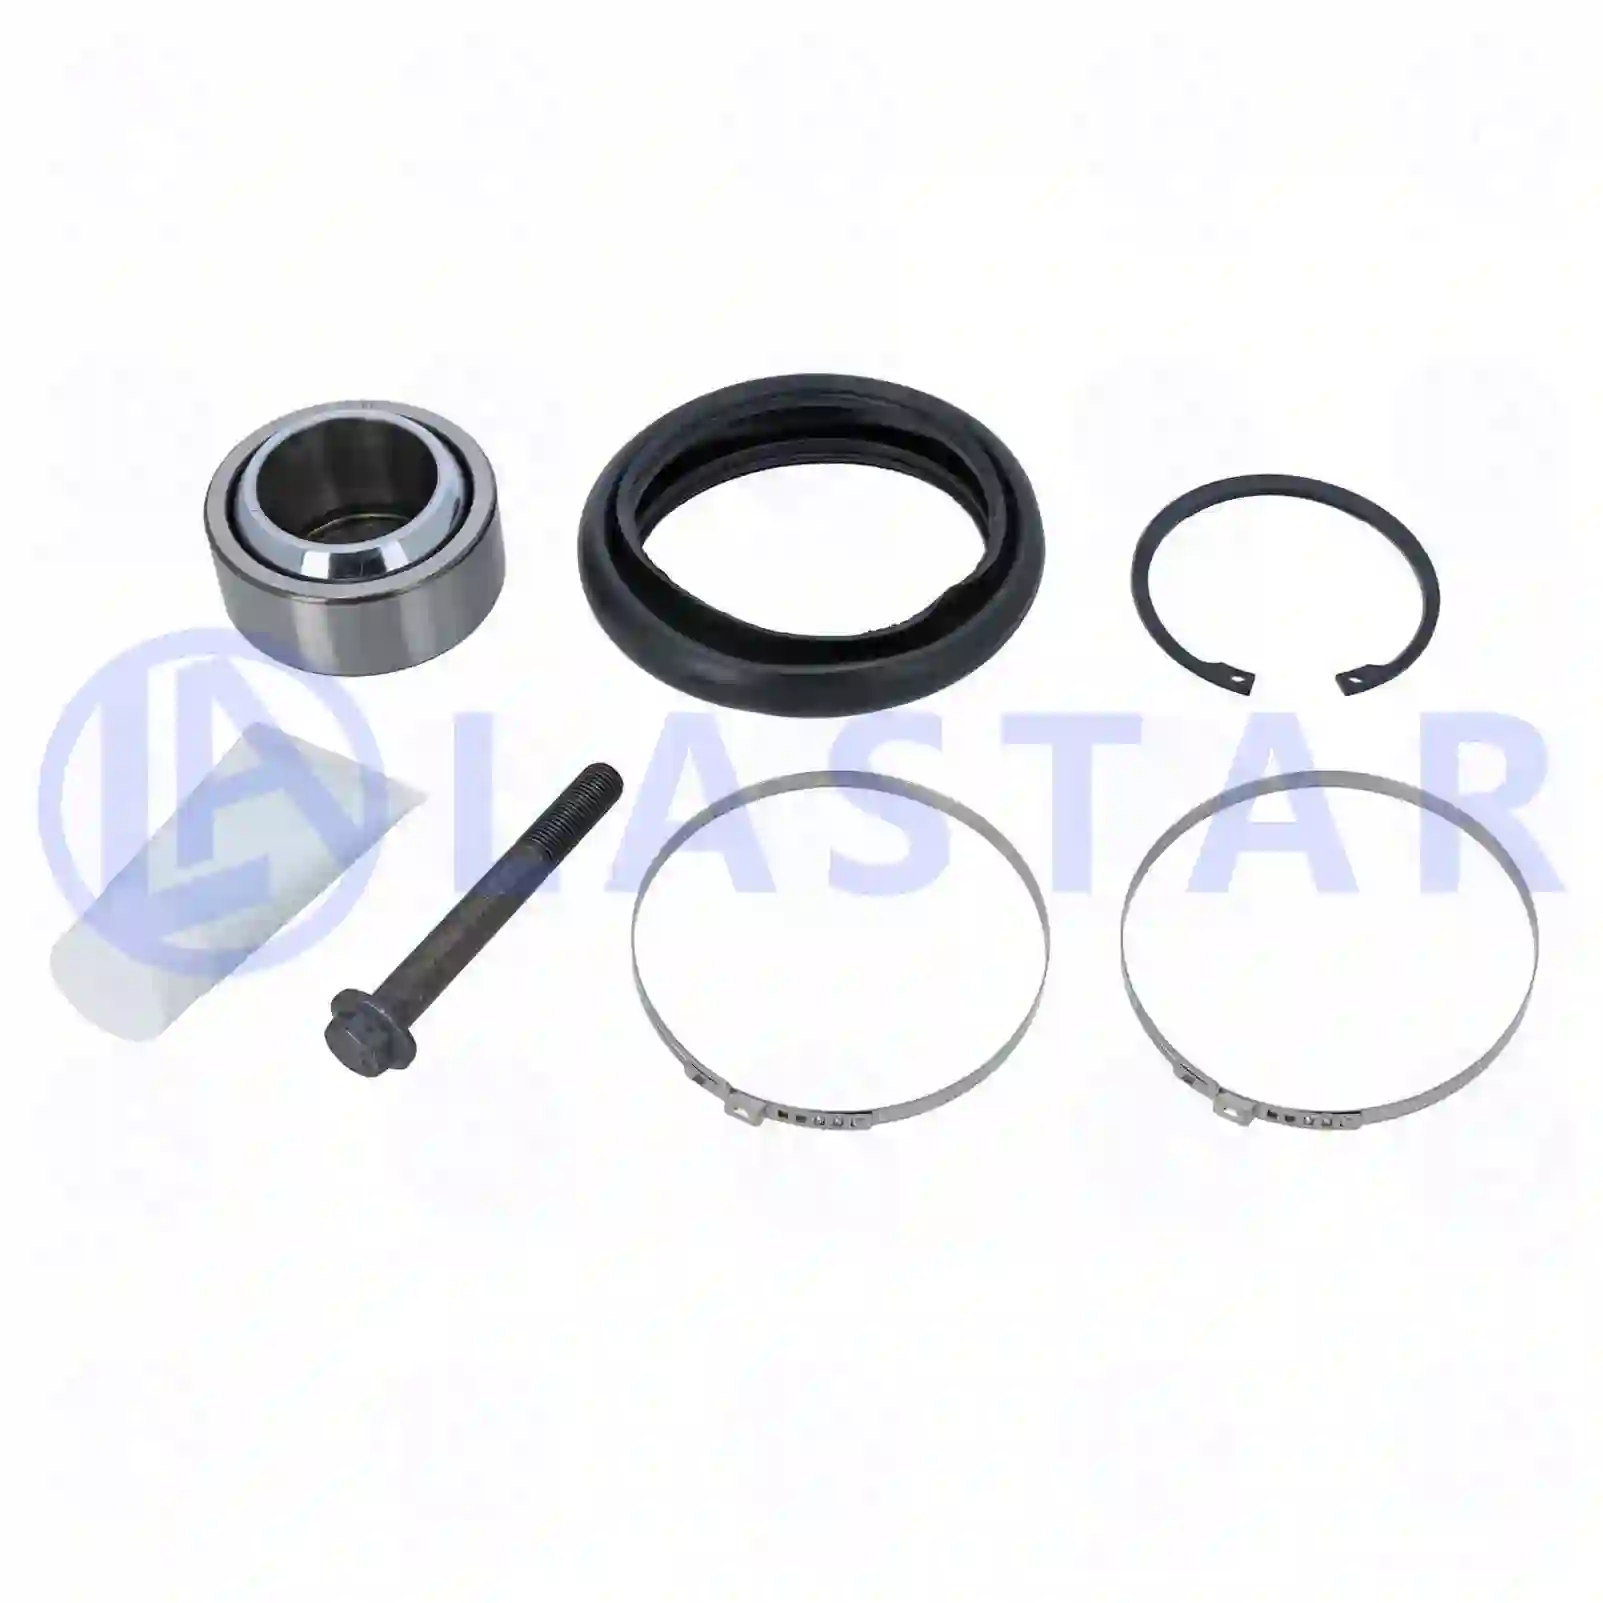 Repair kit, v-stay, without mounting plate, 77729940, 20864583 ||  77729940 Lastar Spare Part | Truck Spare Parts, Auotomotive Spare Parts Repair kit, v-stay, without mounting plate, 77729940, 20864583 ||  77729940 Lastar Spare Part | Truck Spare Parts, Auotomotive Spare Parts